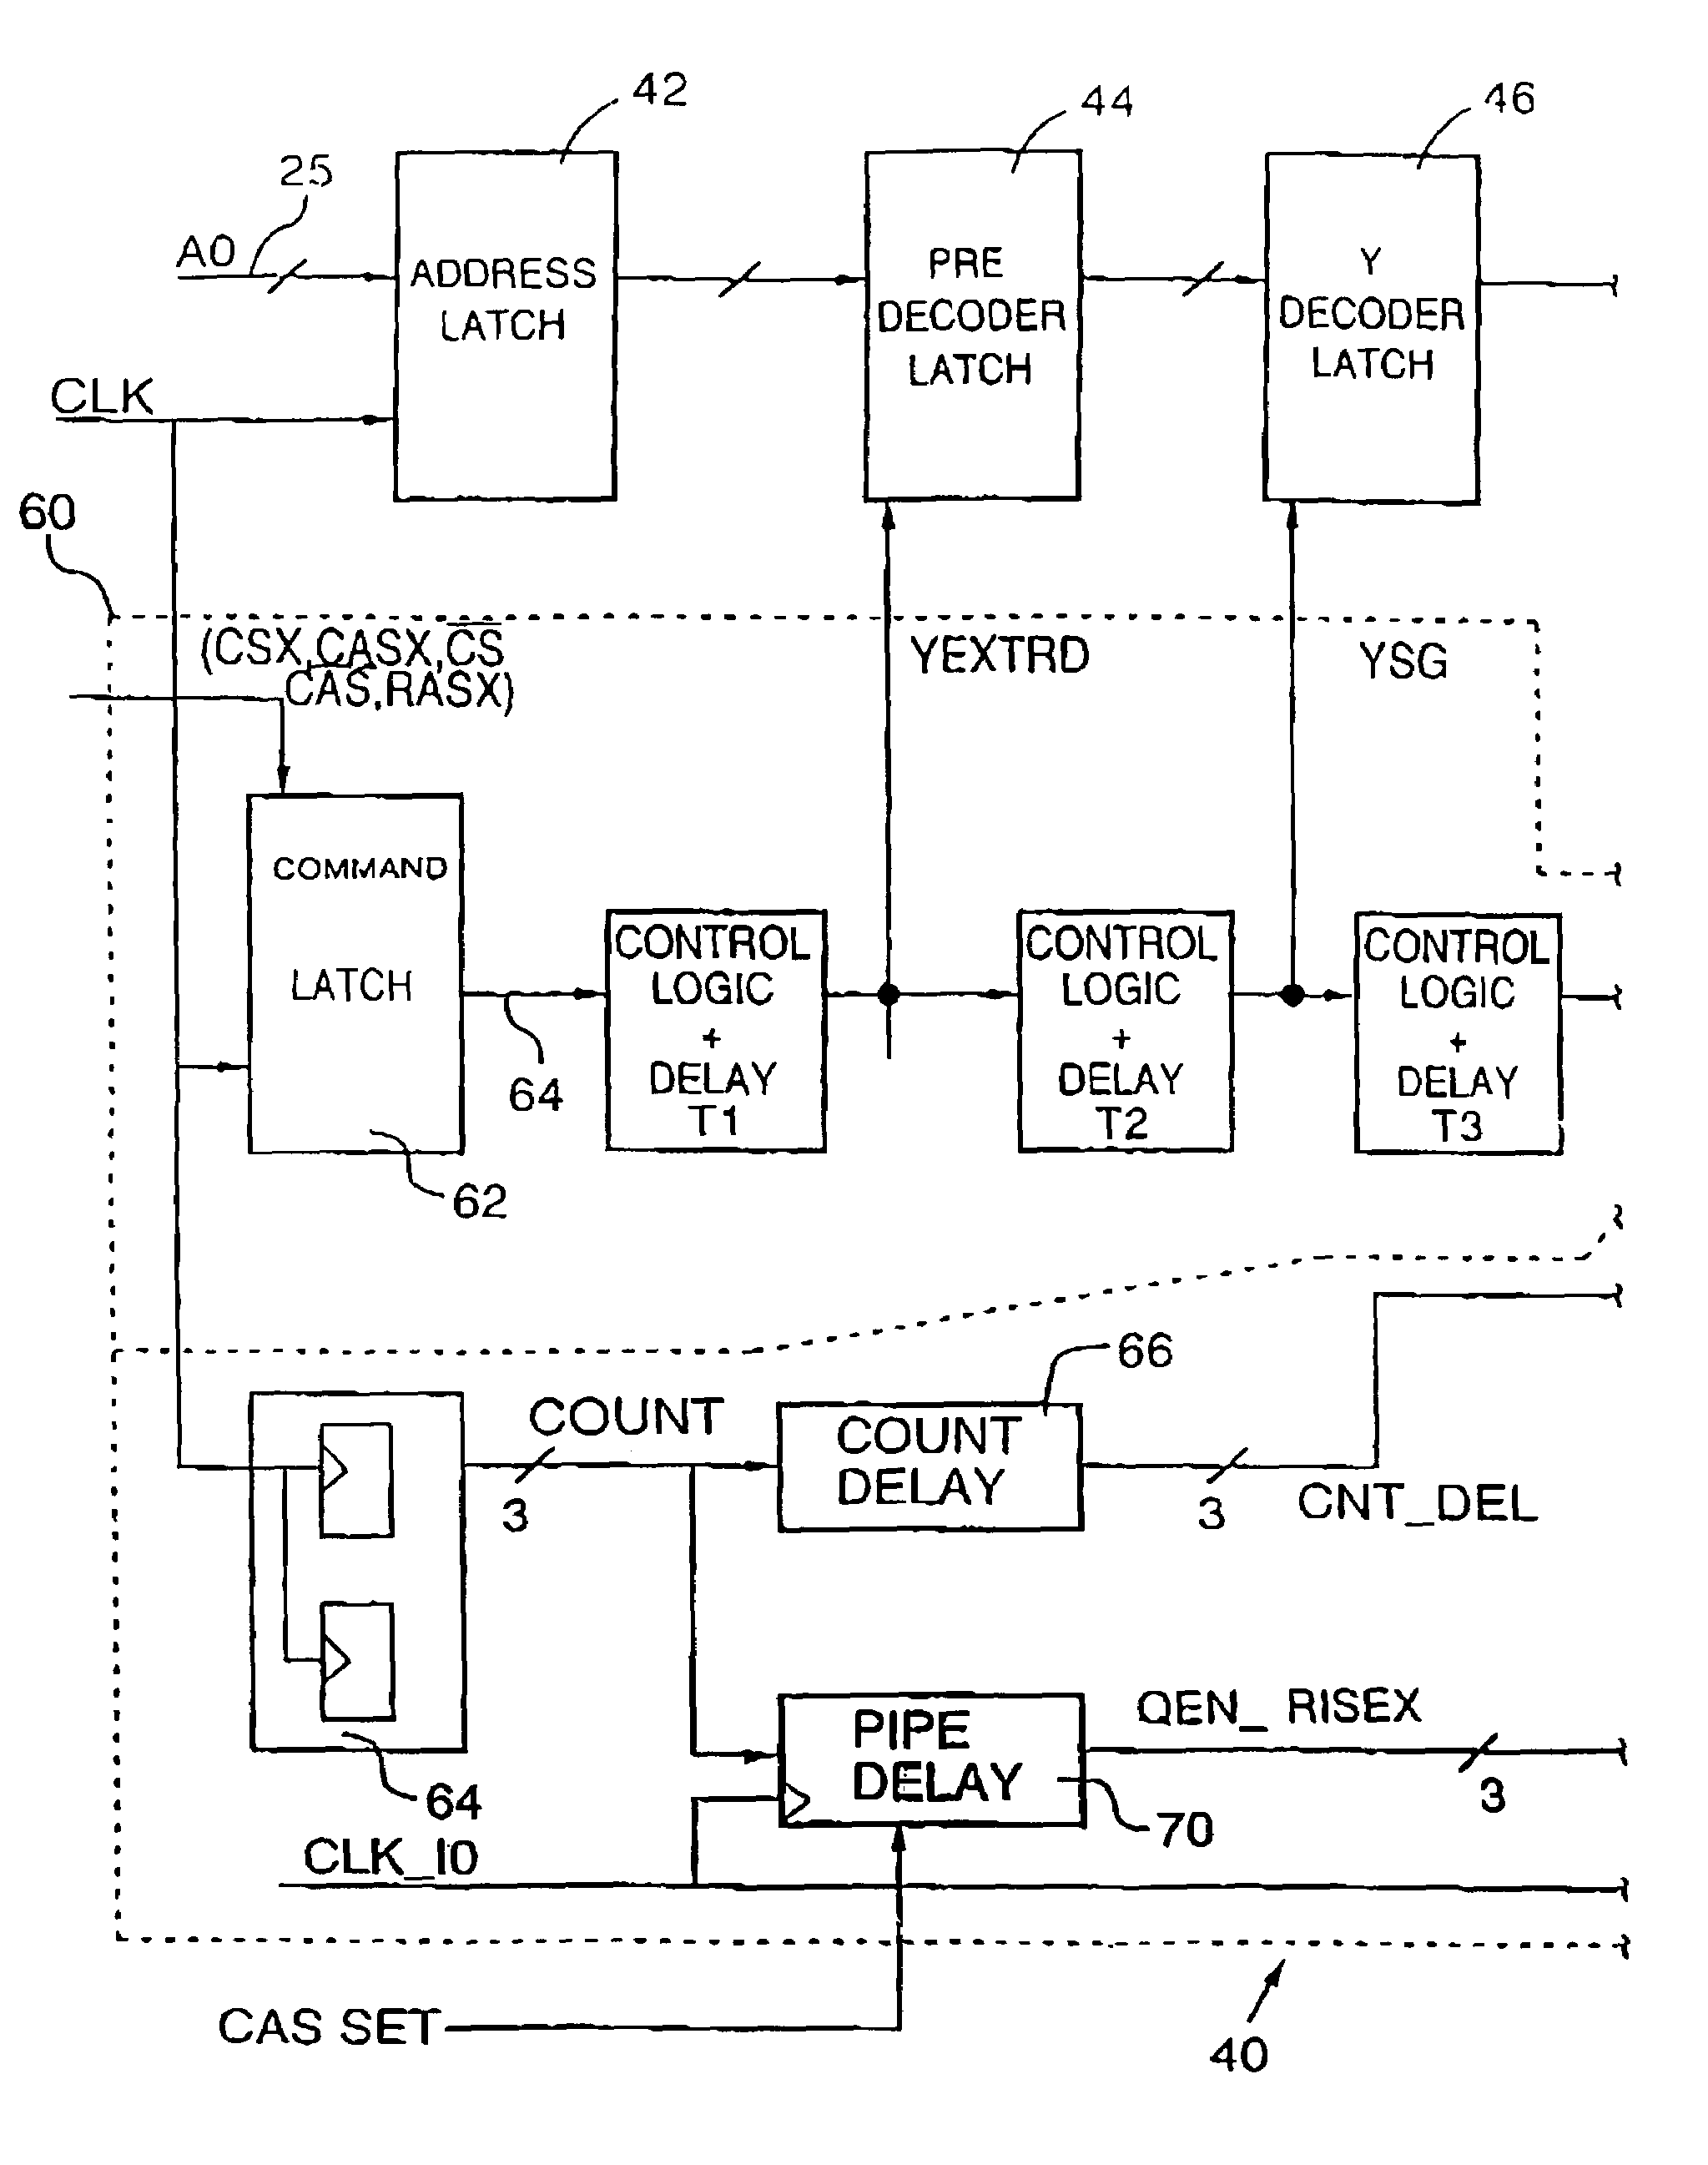 Semiconductor memory asynchronous pipeline